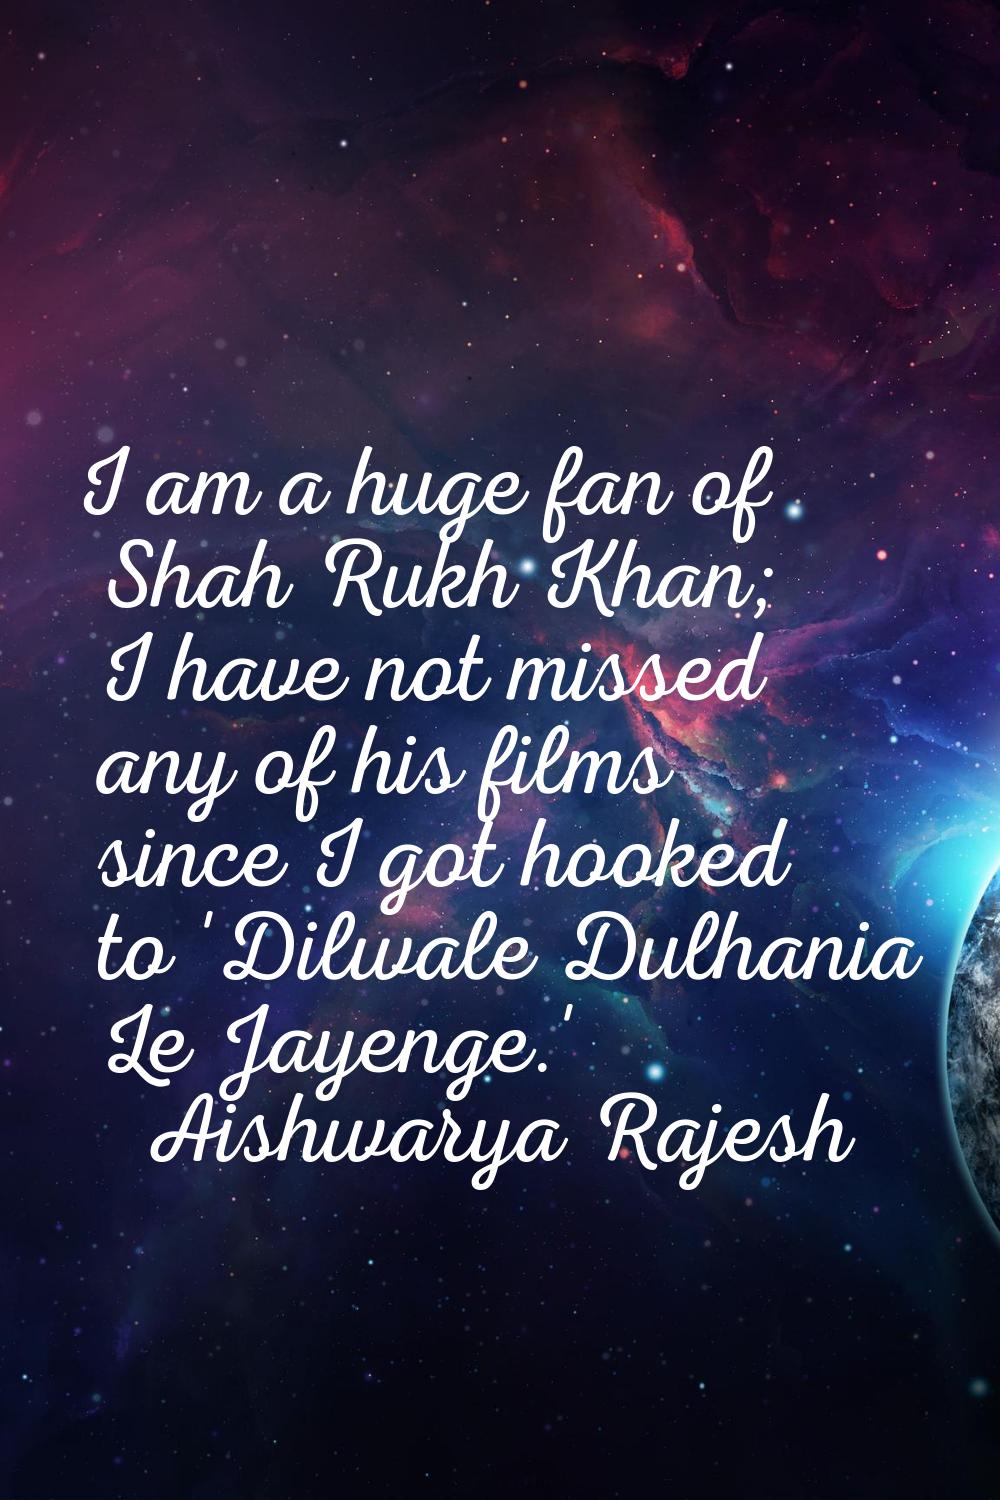 I am a huge fan of Shah Rukh Khan; I have not missed any of his films since I got hooked to 'Dilwal